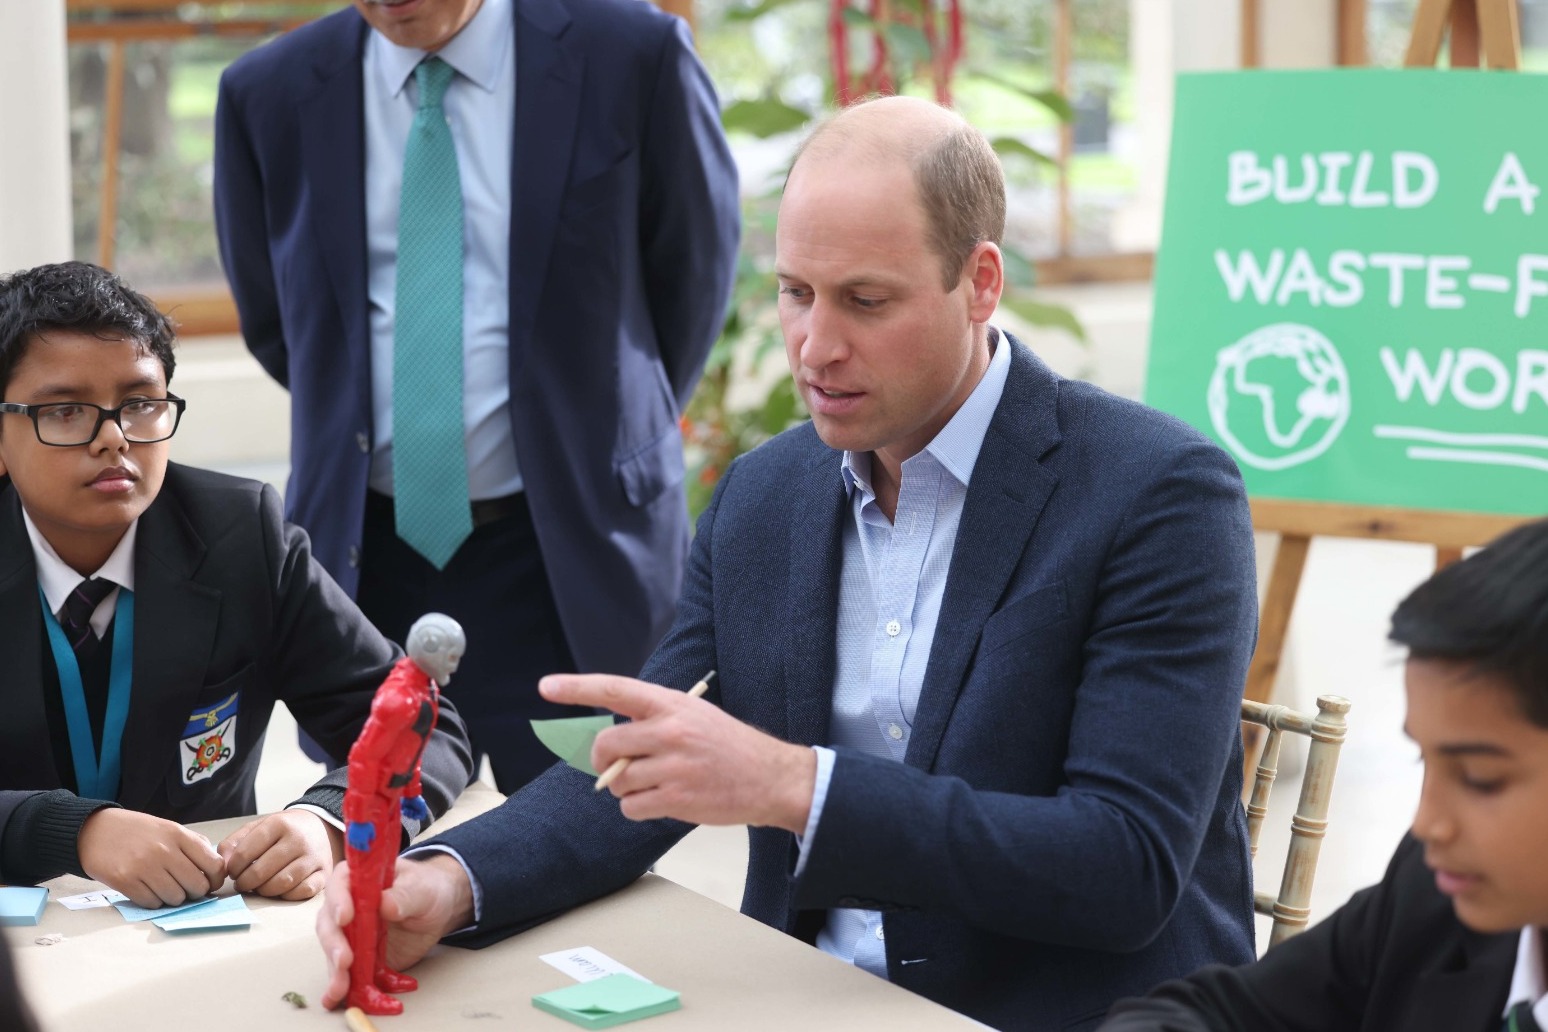 William urges society to ‘unite to repair planet’ at first Earthshot ceremony 